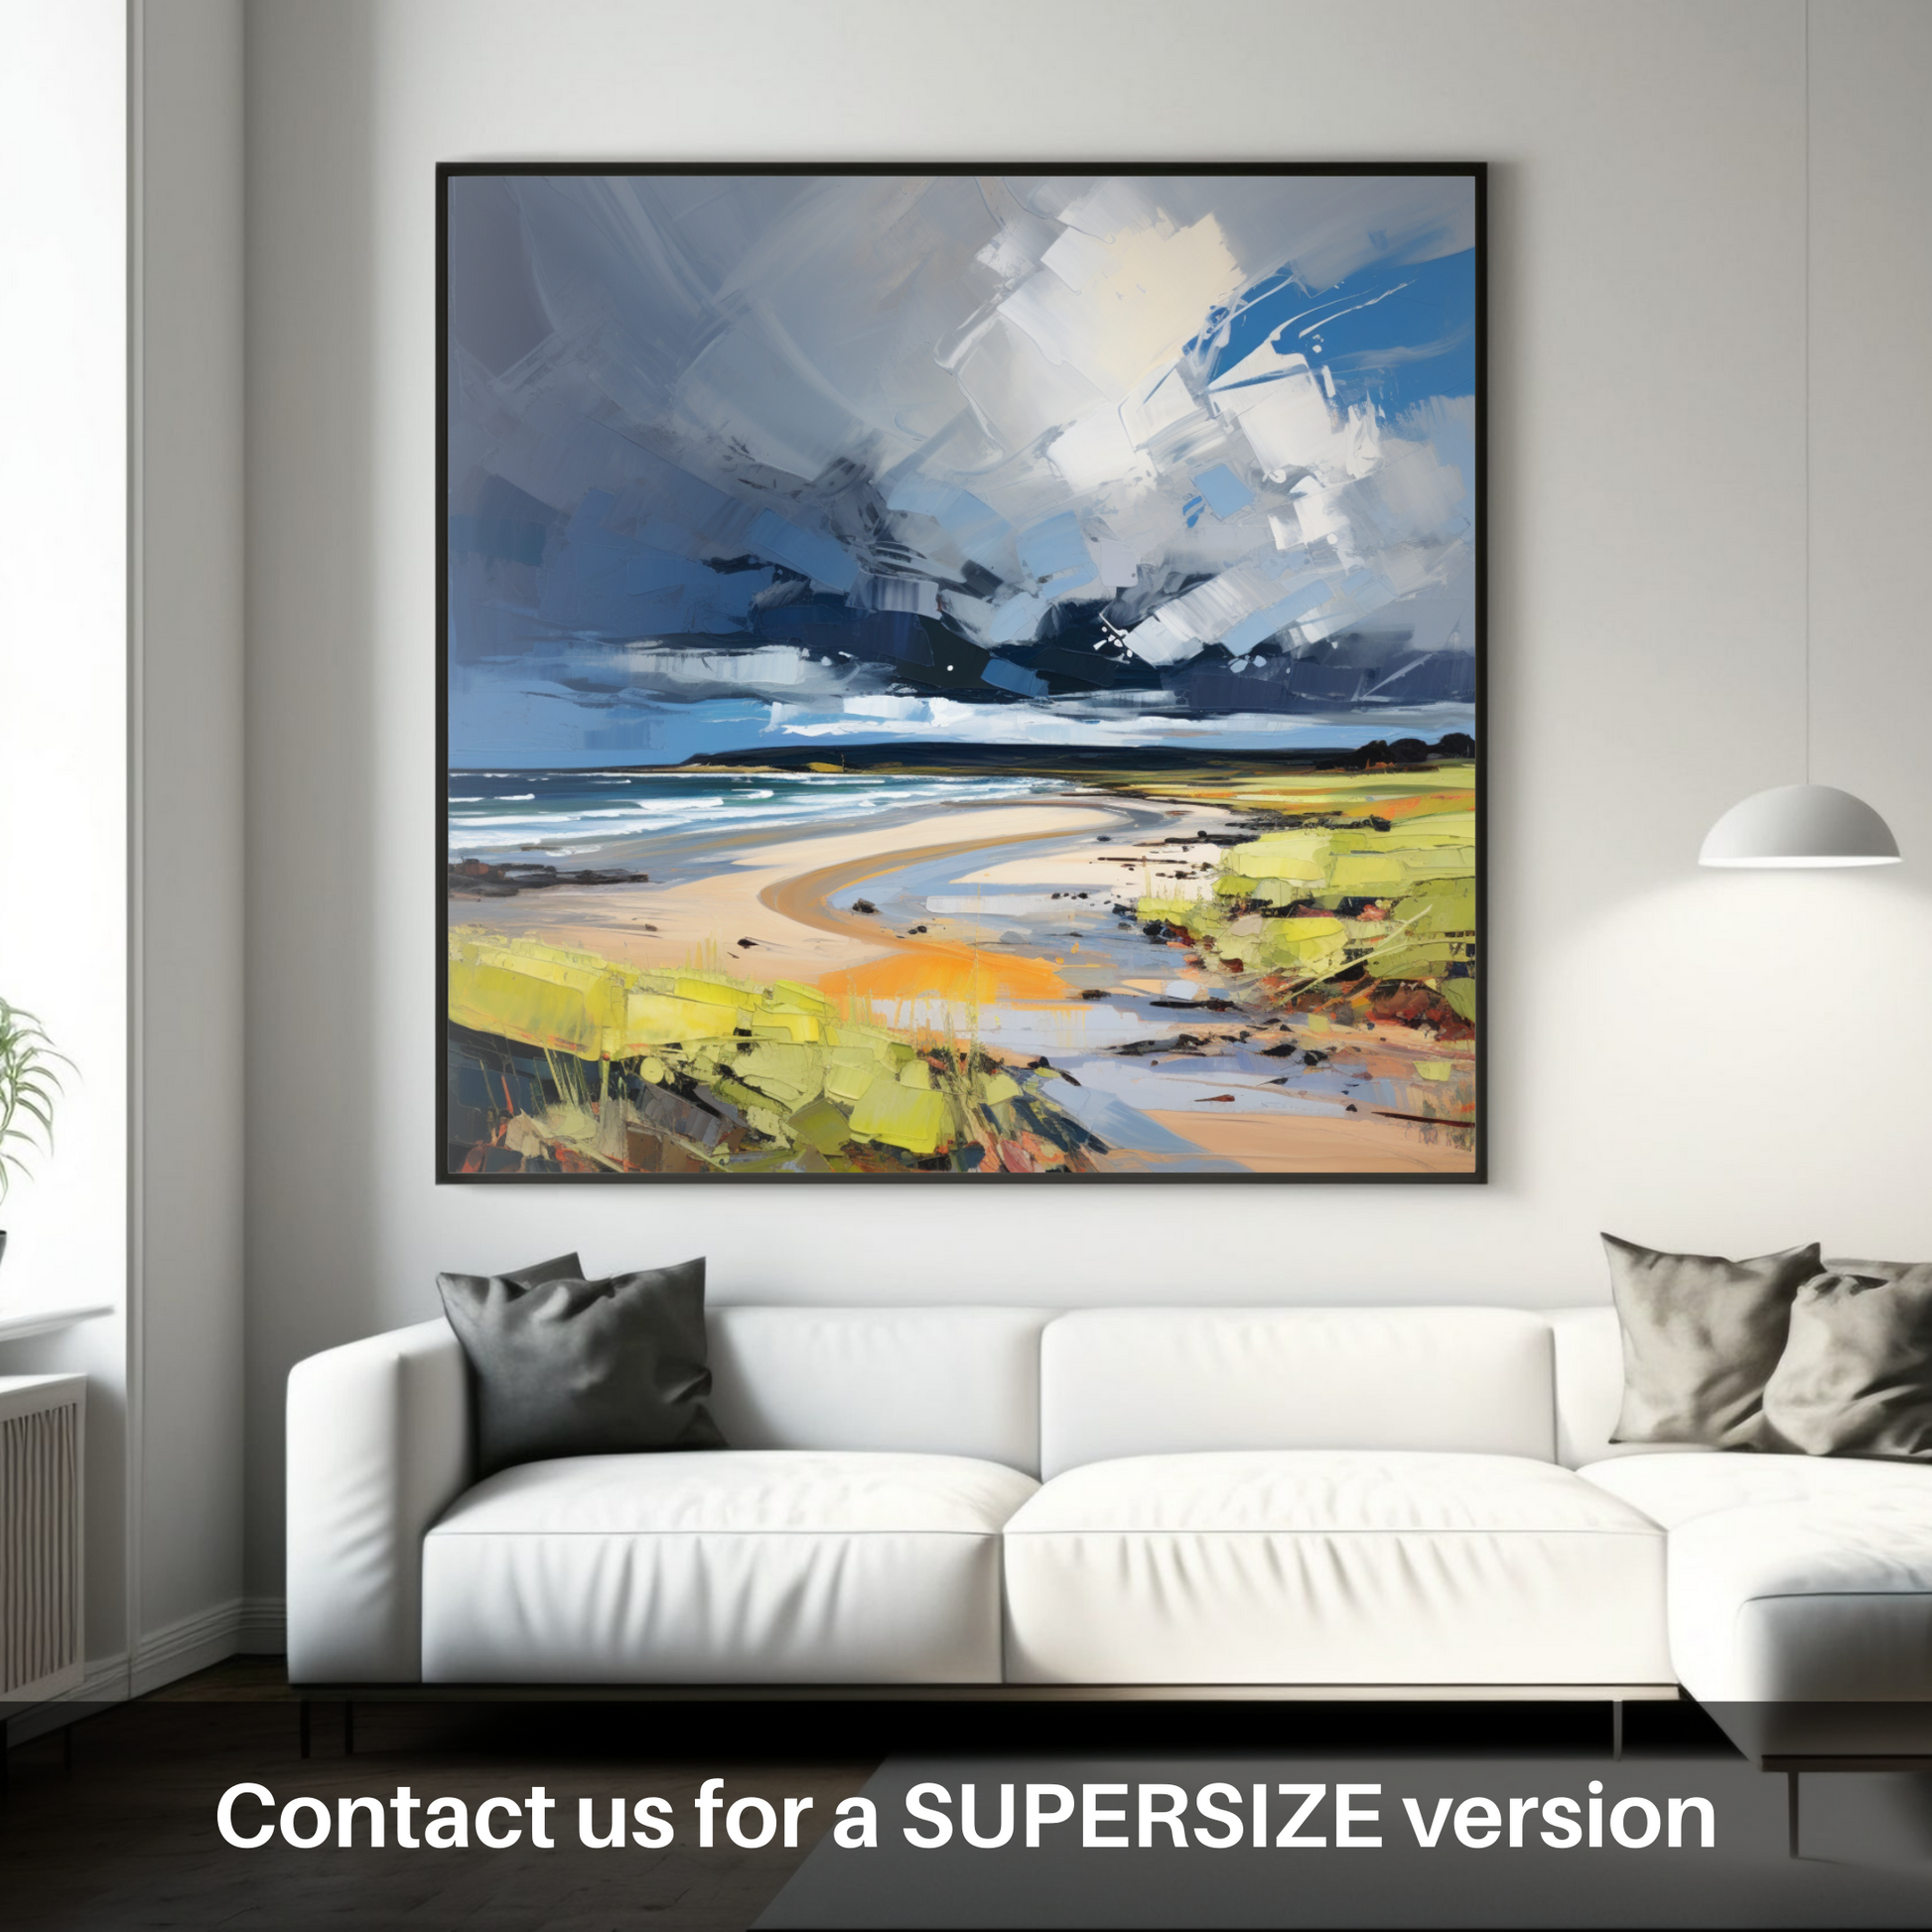 Huge supersize print of Gullane Beach with a stormy sky